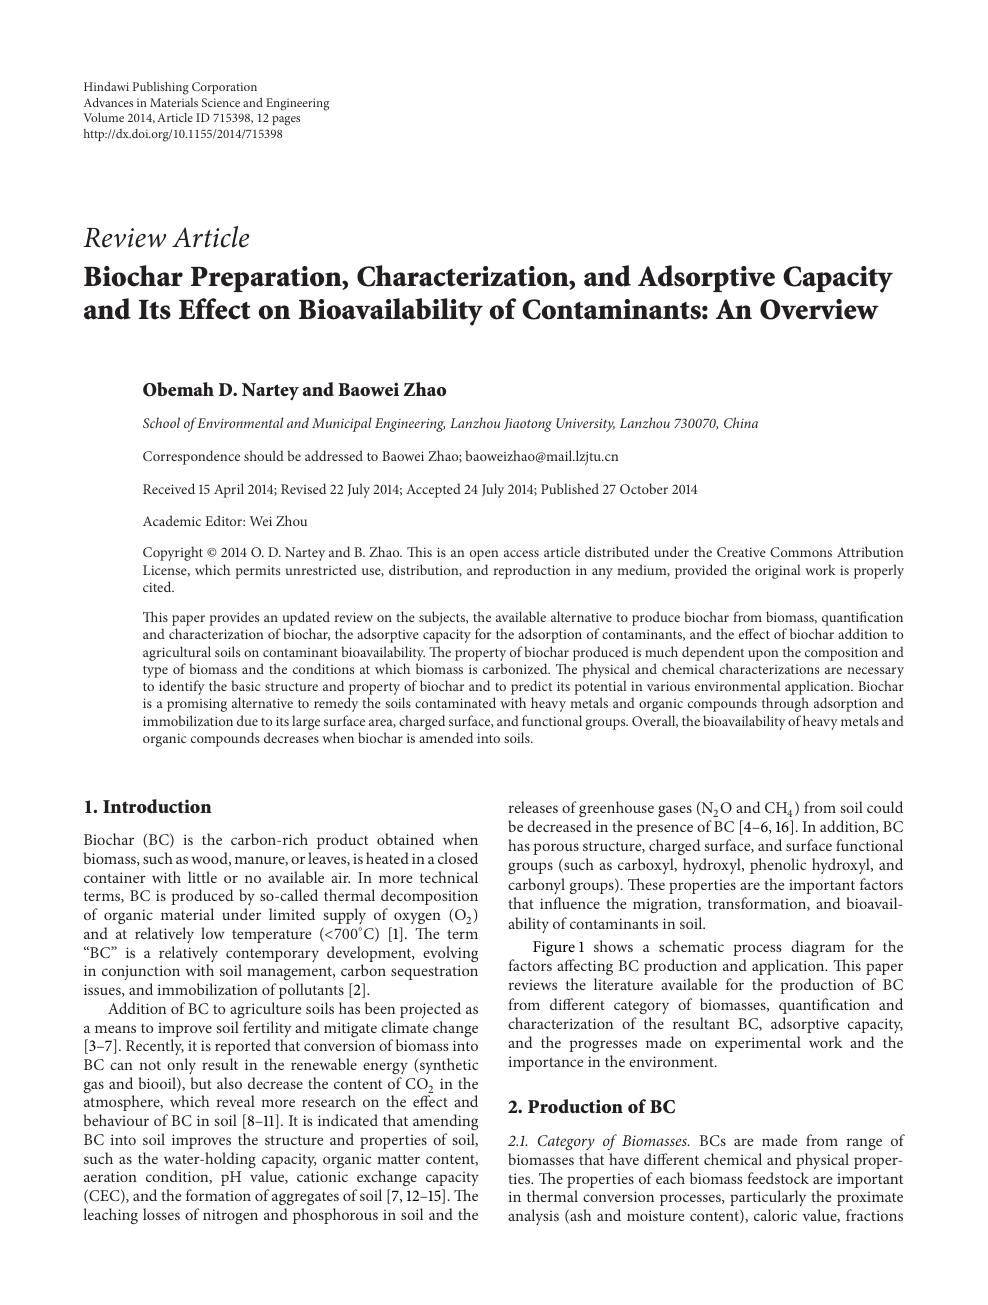 Biochar Preparation Characterization And Adsorptive Capacity And Its Effect On Bioavailability Of Contaminants An Overview Topic Of Research Paper In Chemical Engineering Download Scholarly Article Pdf And Read For Free On